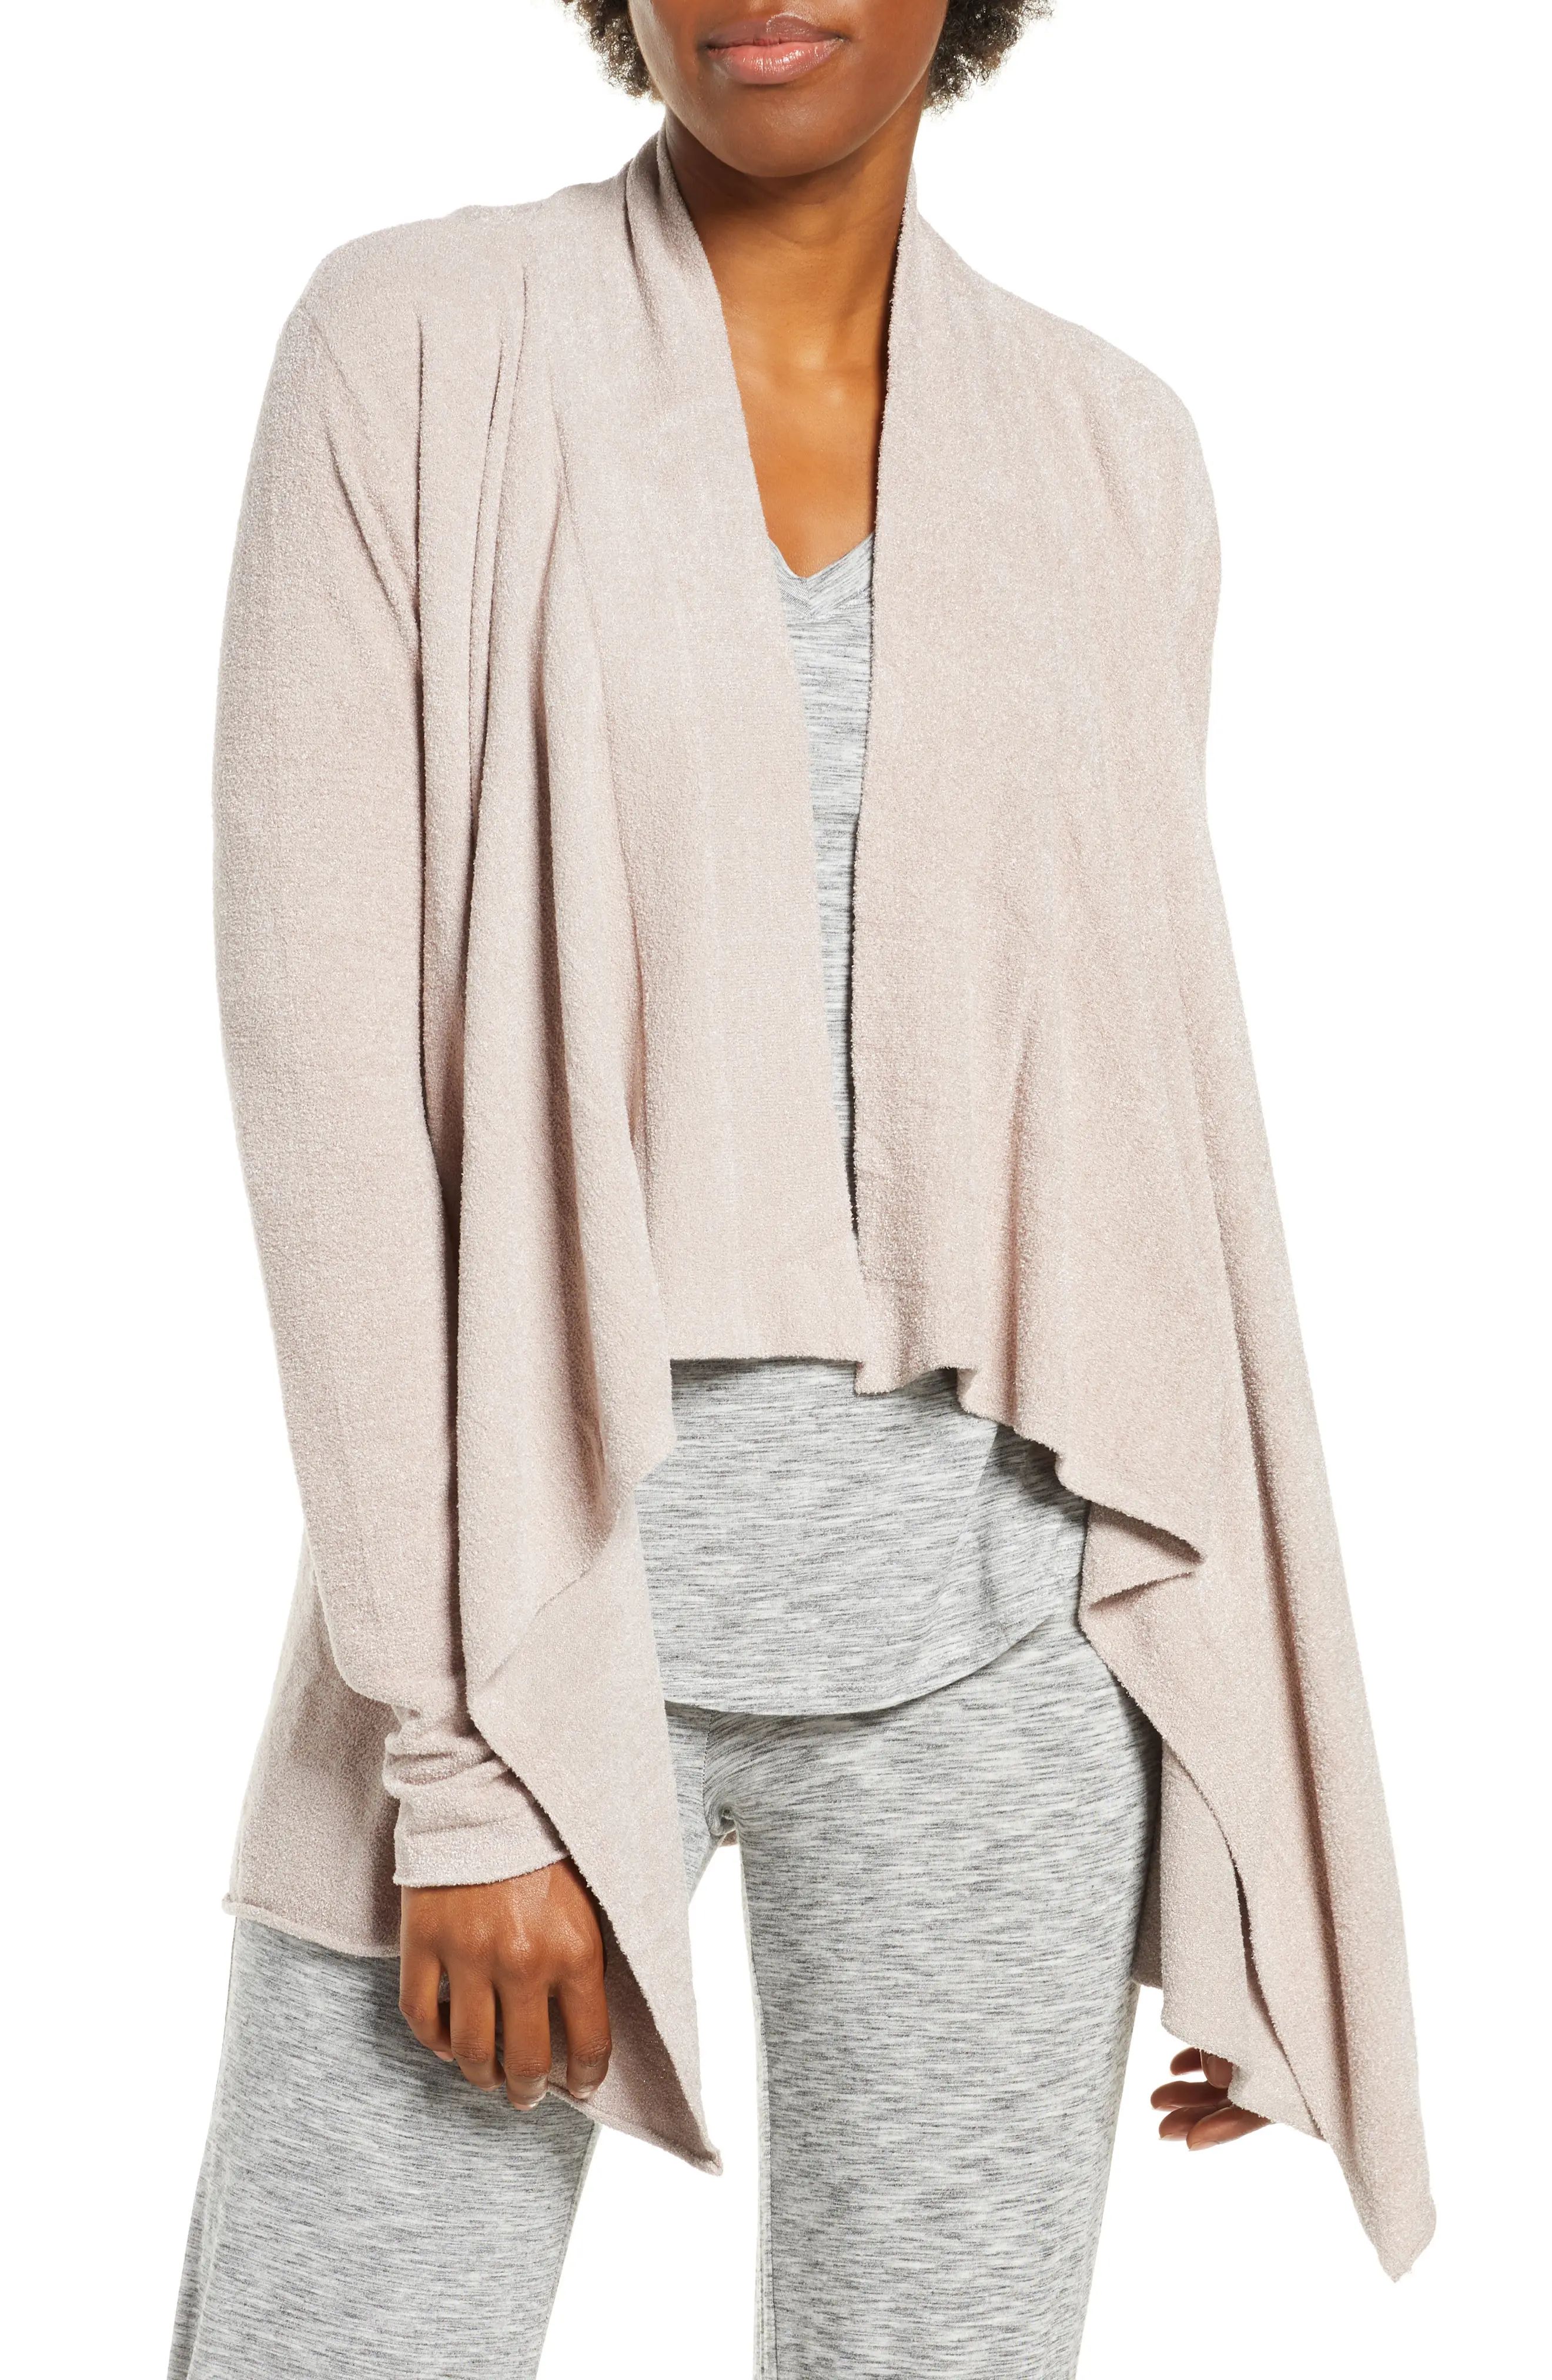 Barefoot Dreams(R) CozyChic(TM) Ultra Lite High/Low Cardigan in Faded Rose at Nordstrom, Size Large | Nordstrom